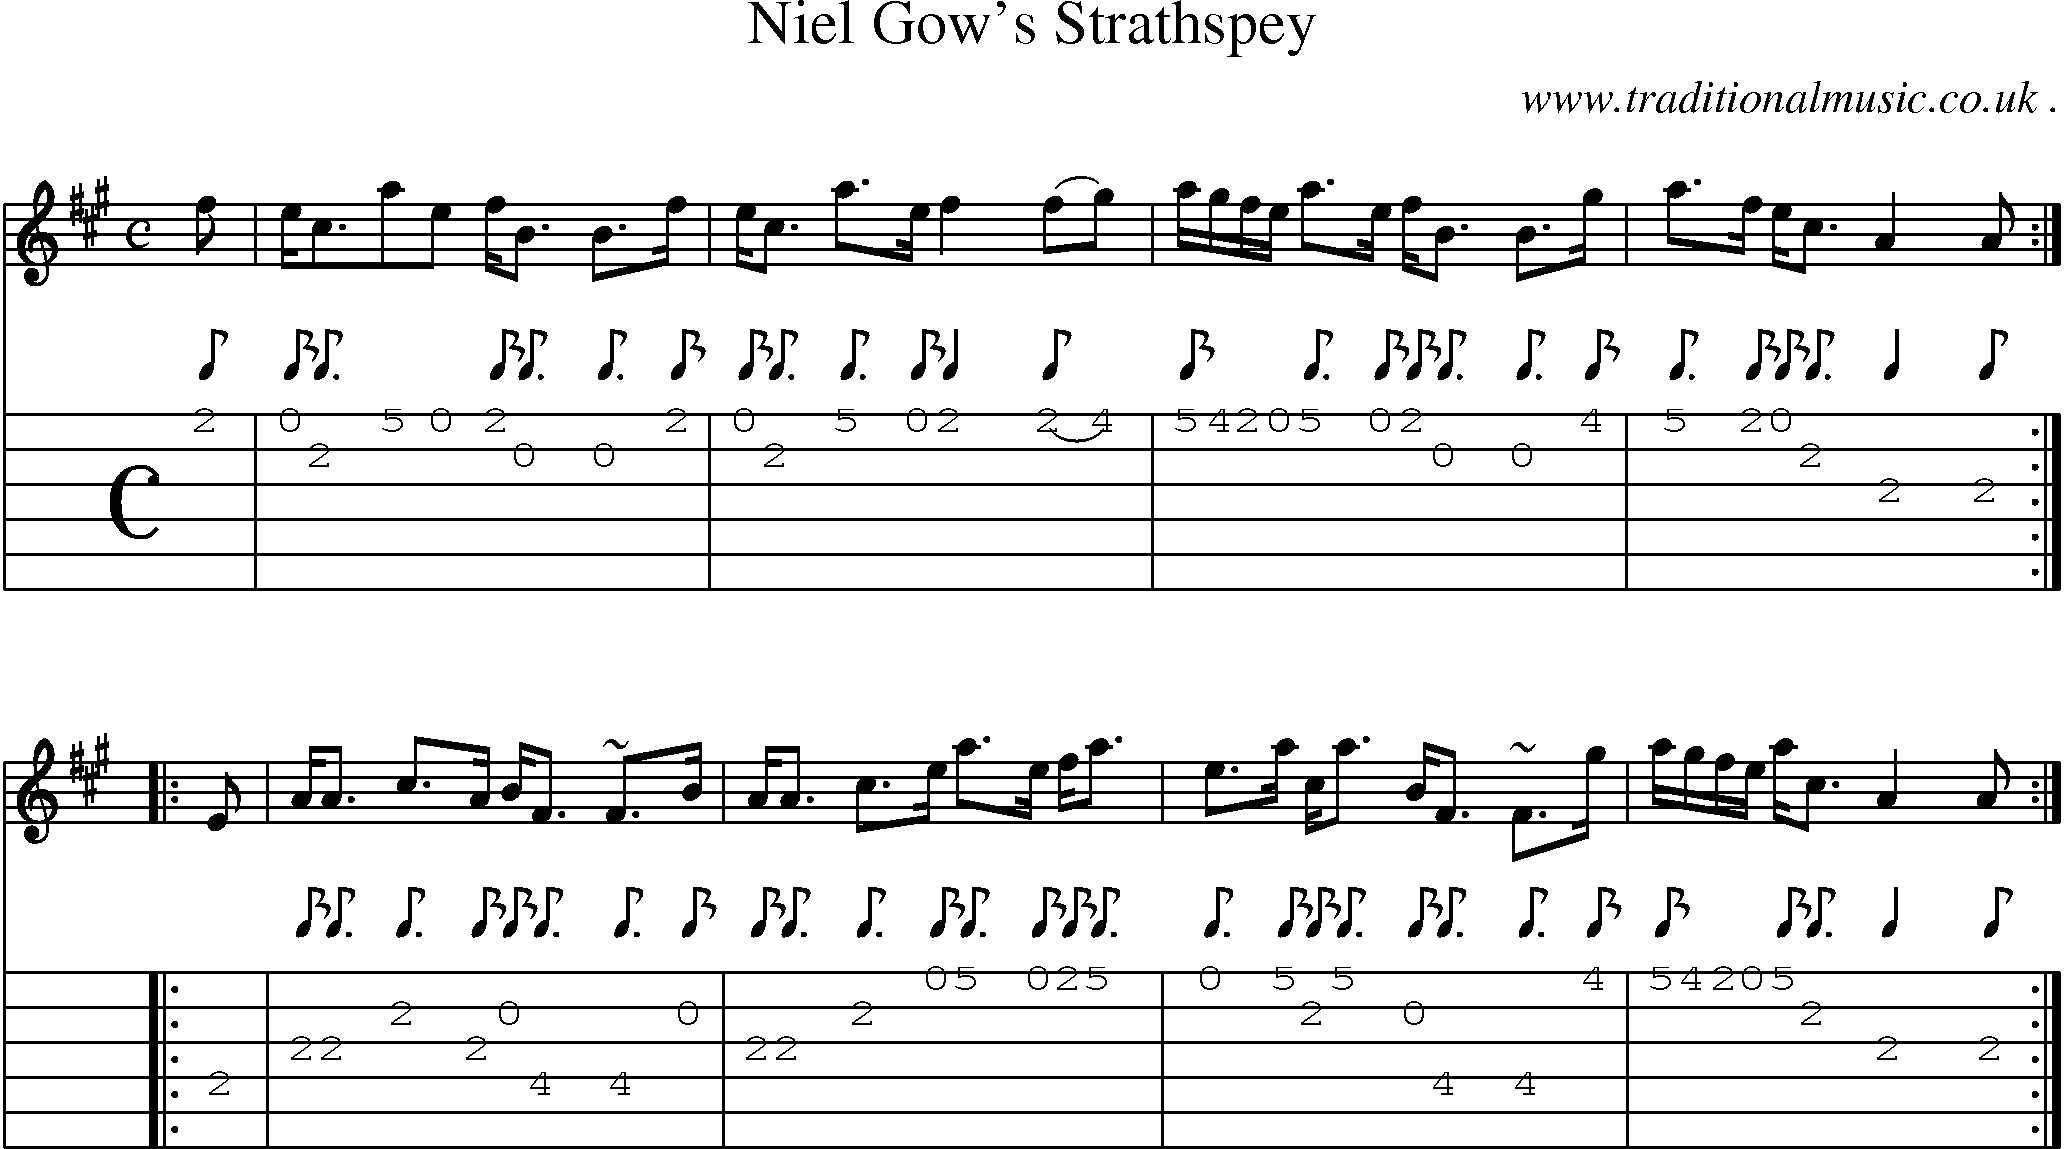 Sheet-music  score, Chords and Guitar Tabs for Niel Gows Strathspey